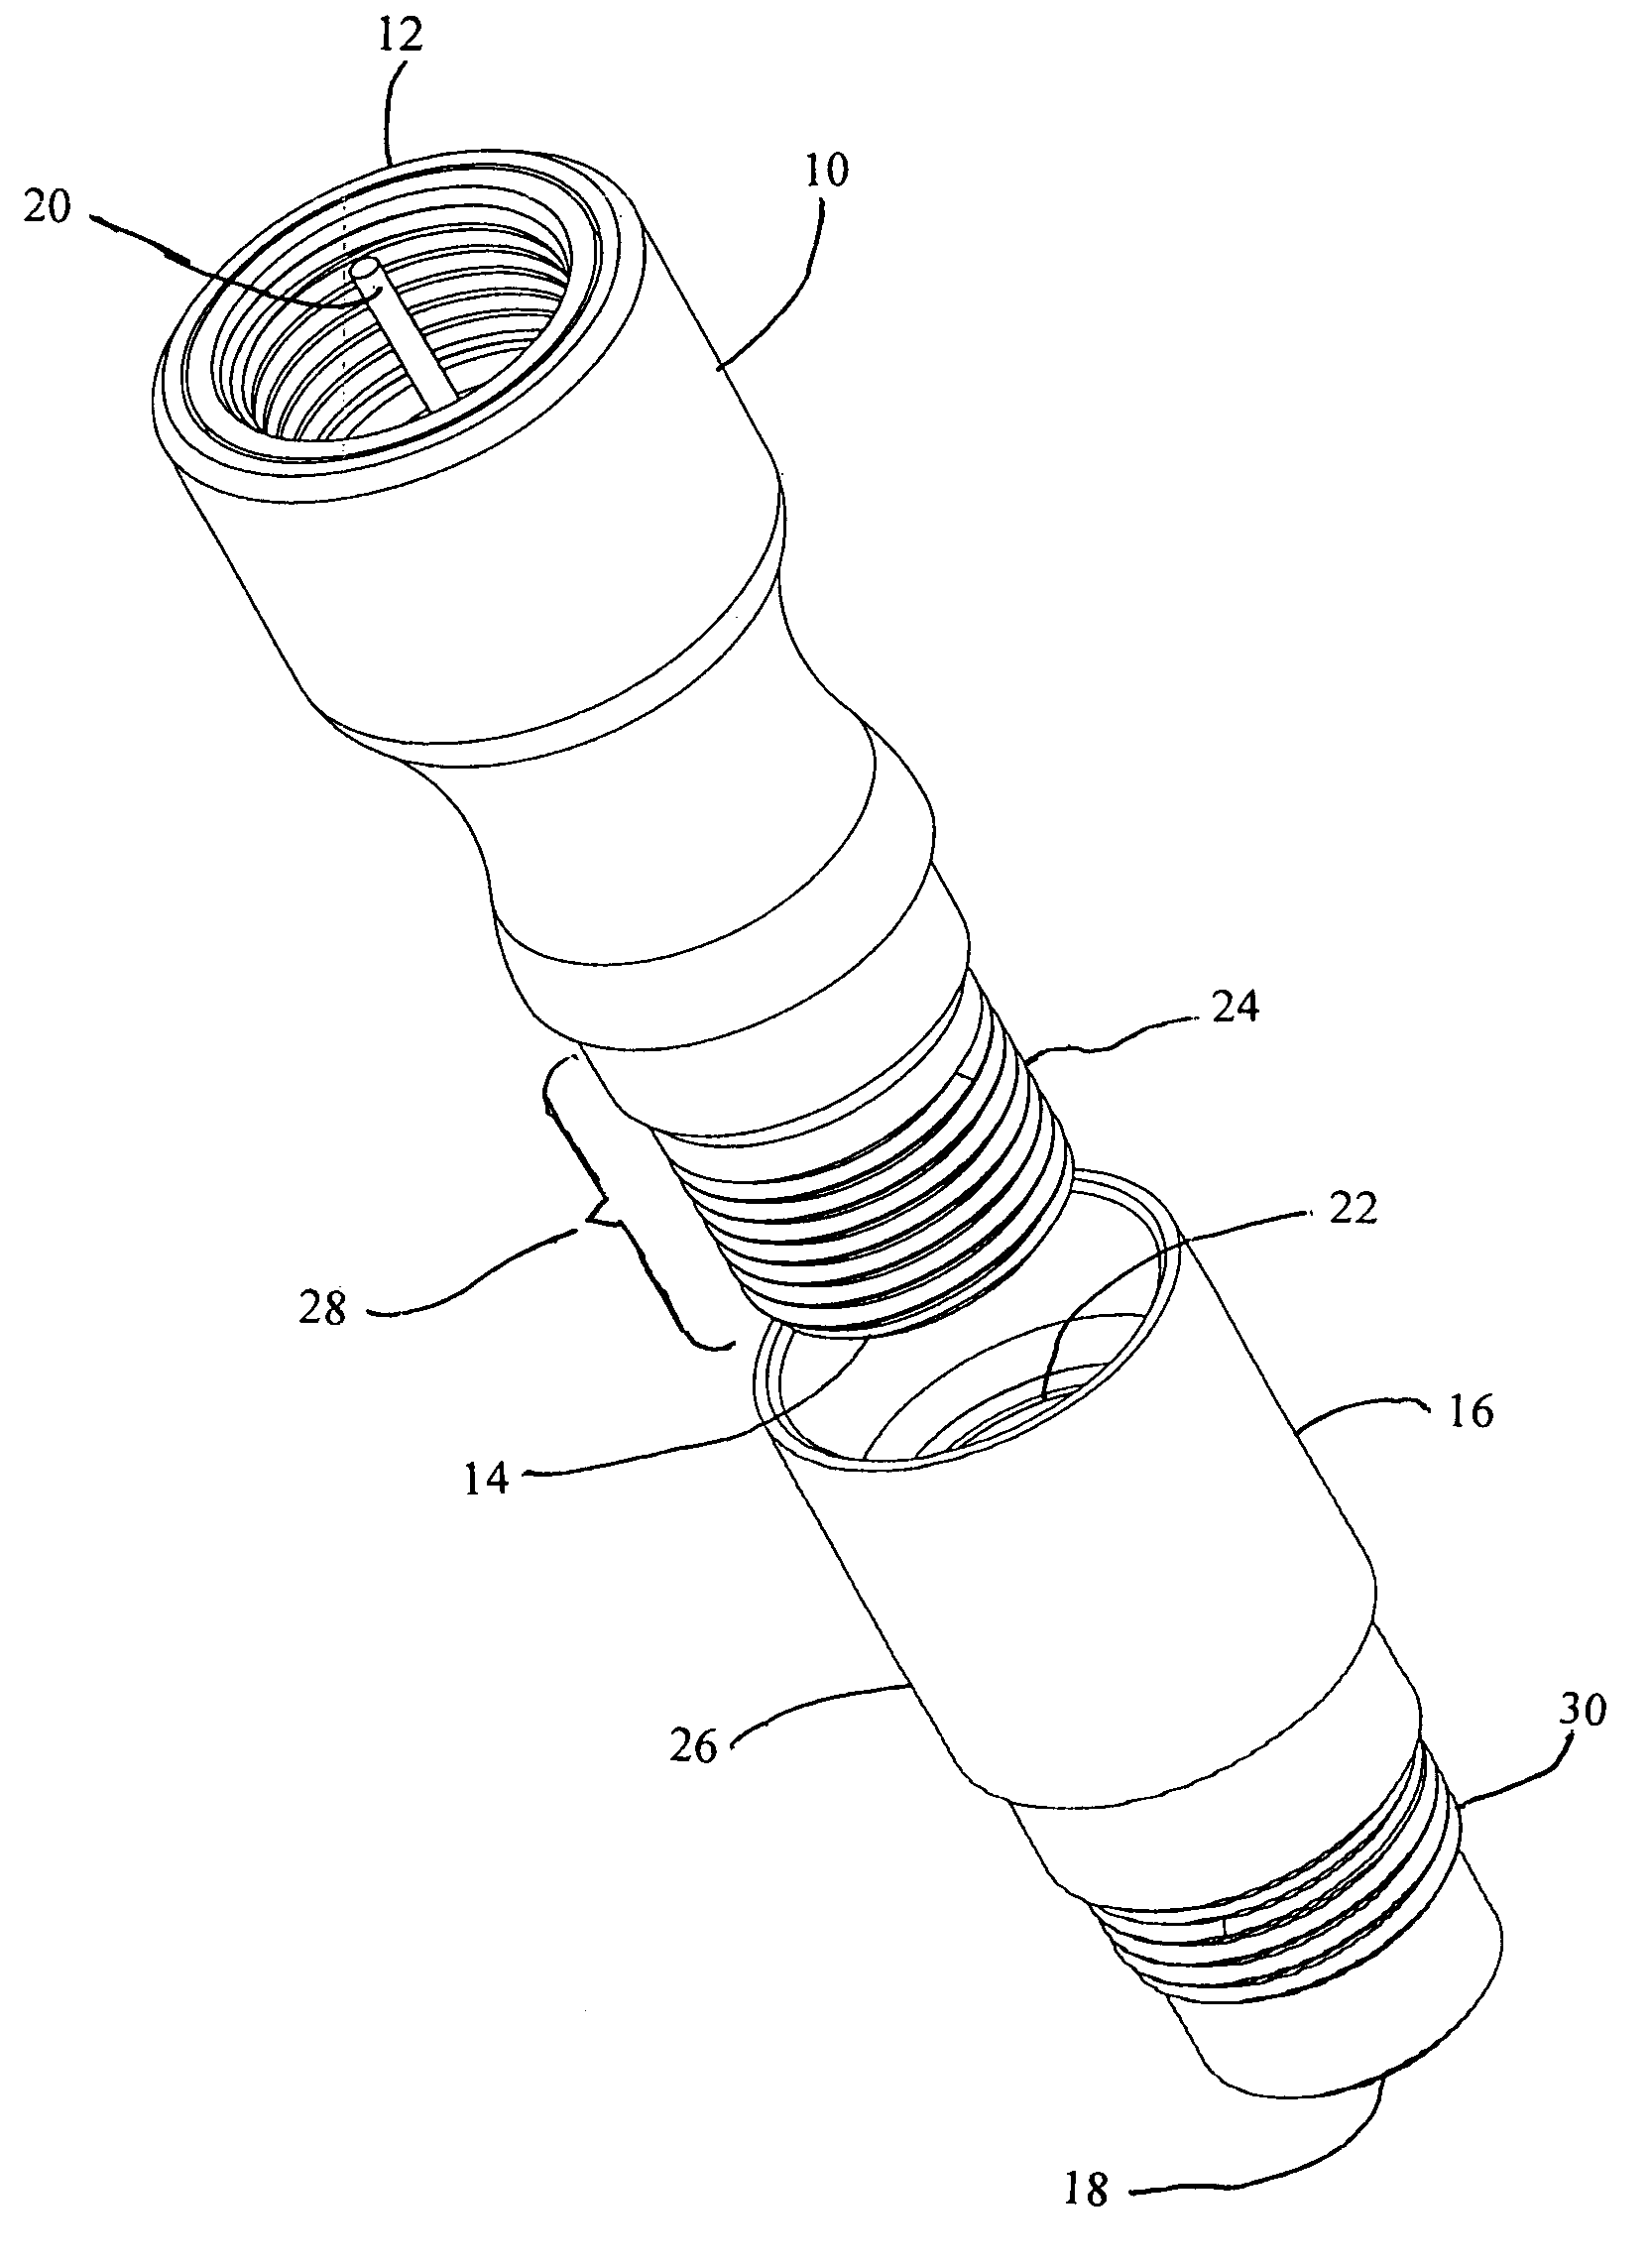 Insulated cable attachment device